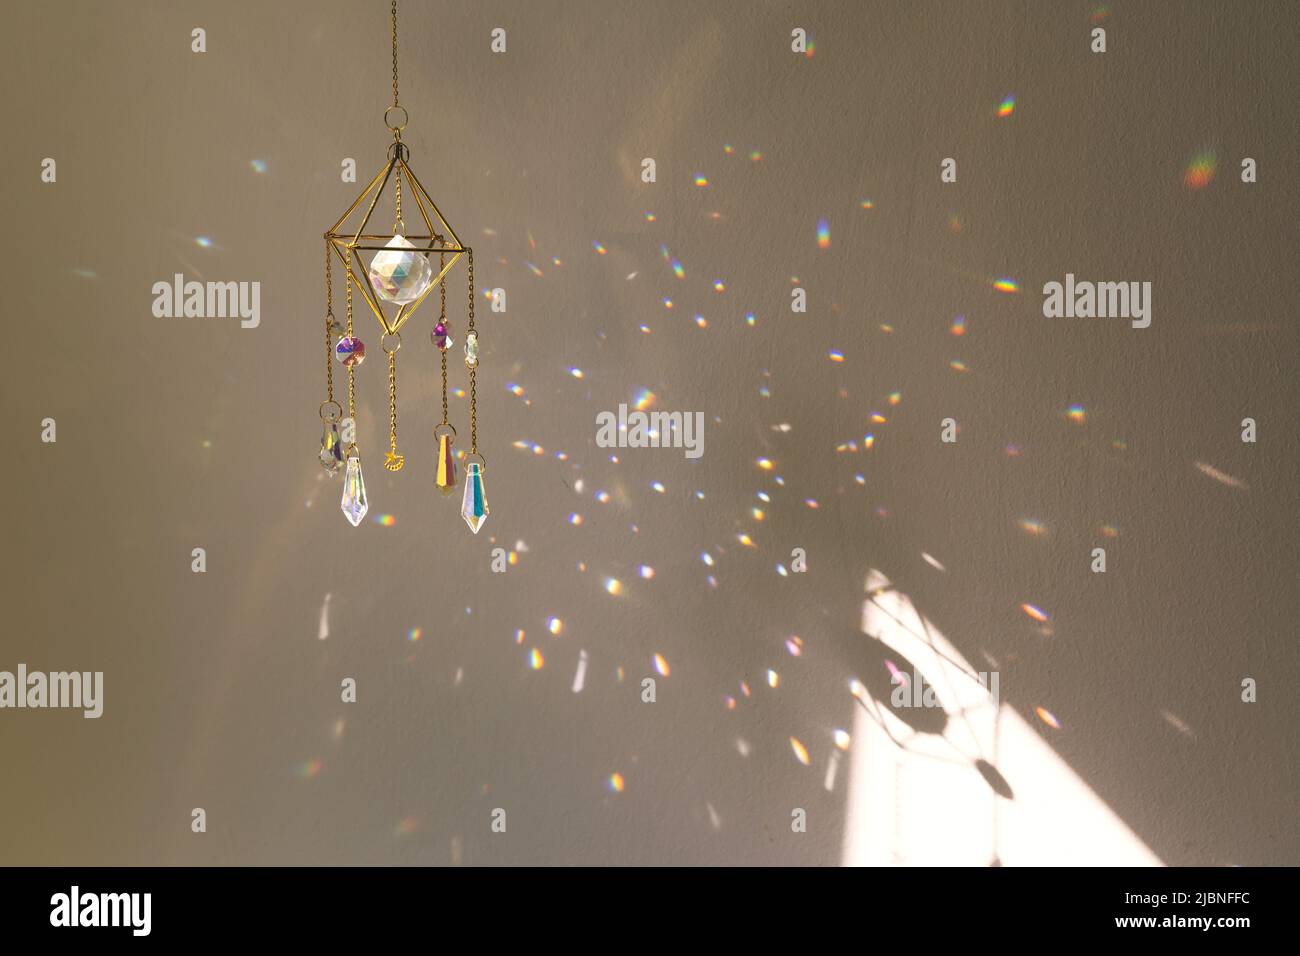 Suncatcher hanging in home during sunset. Many sun beams on the wall. Good Feng Shui, energy flow concept Stock Photo